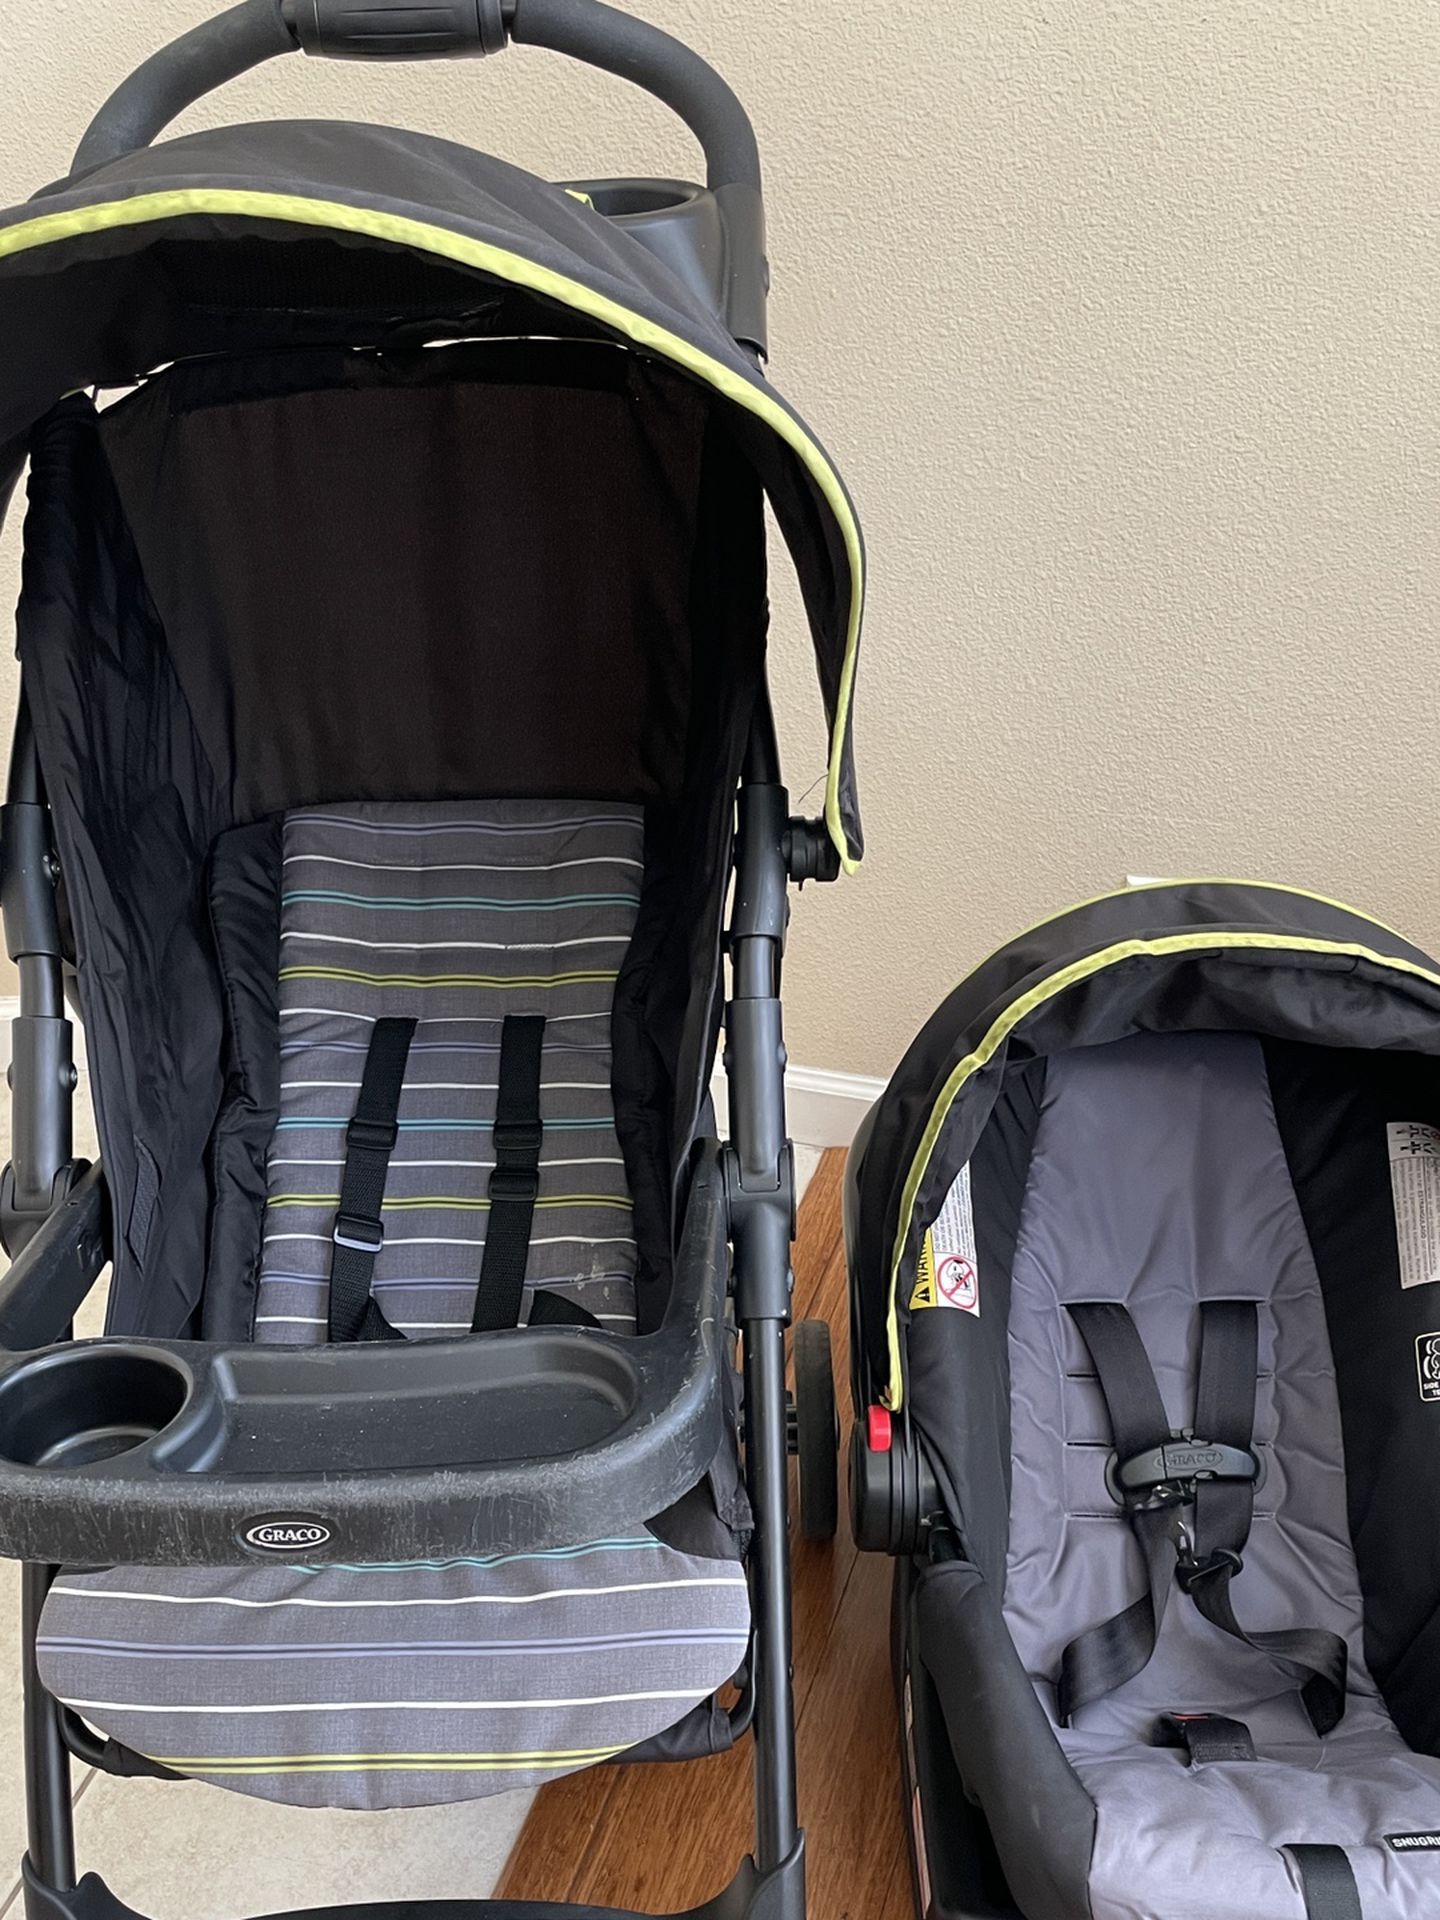 Graco Literider Travel System (Car seat And Stroller)